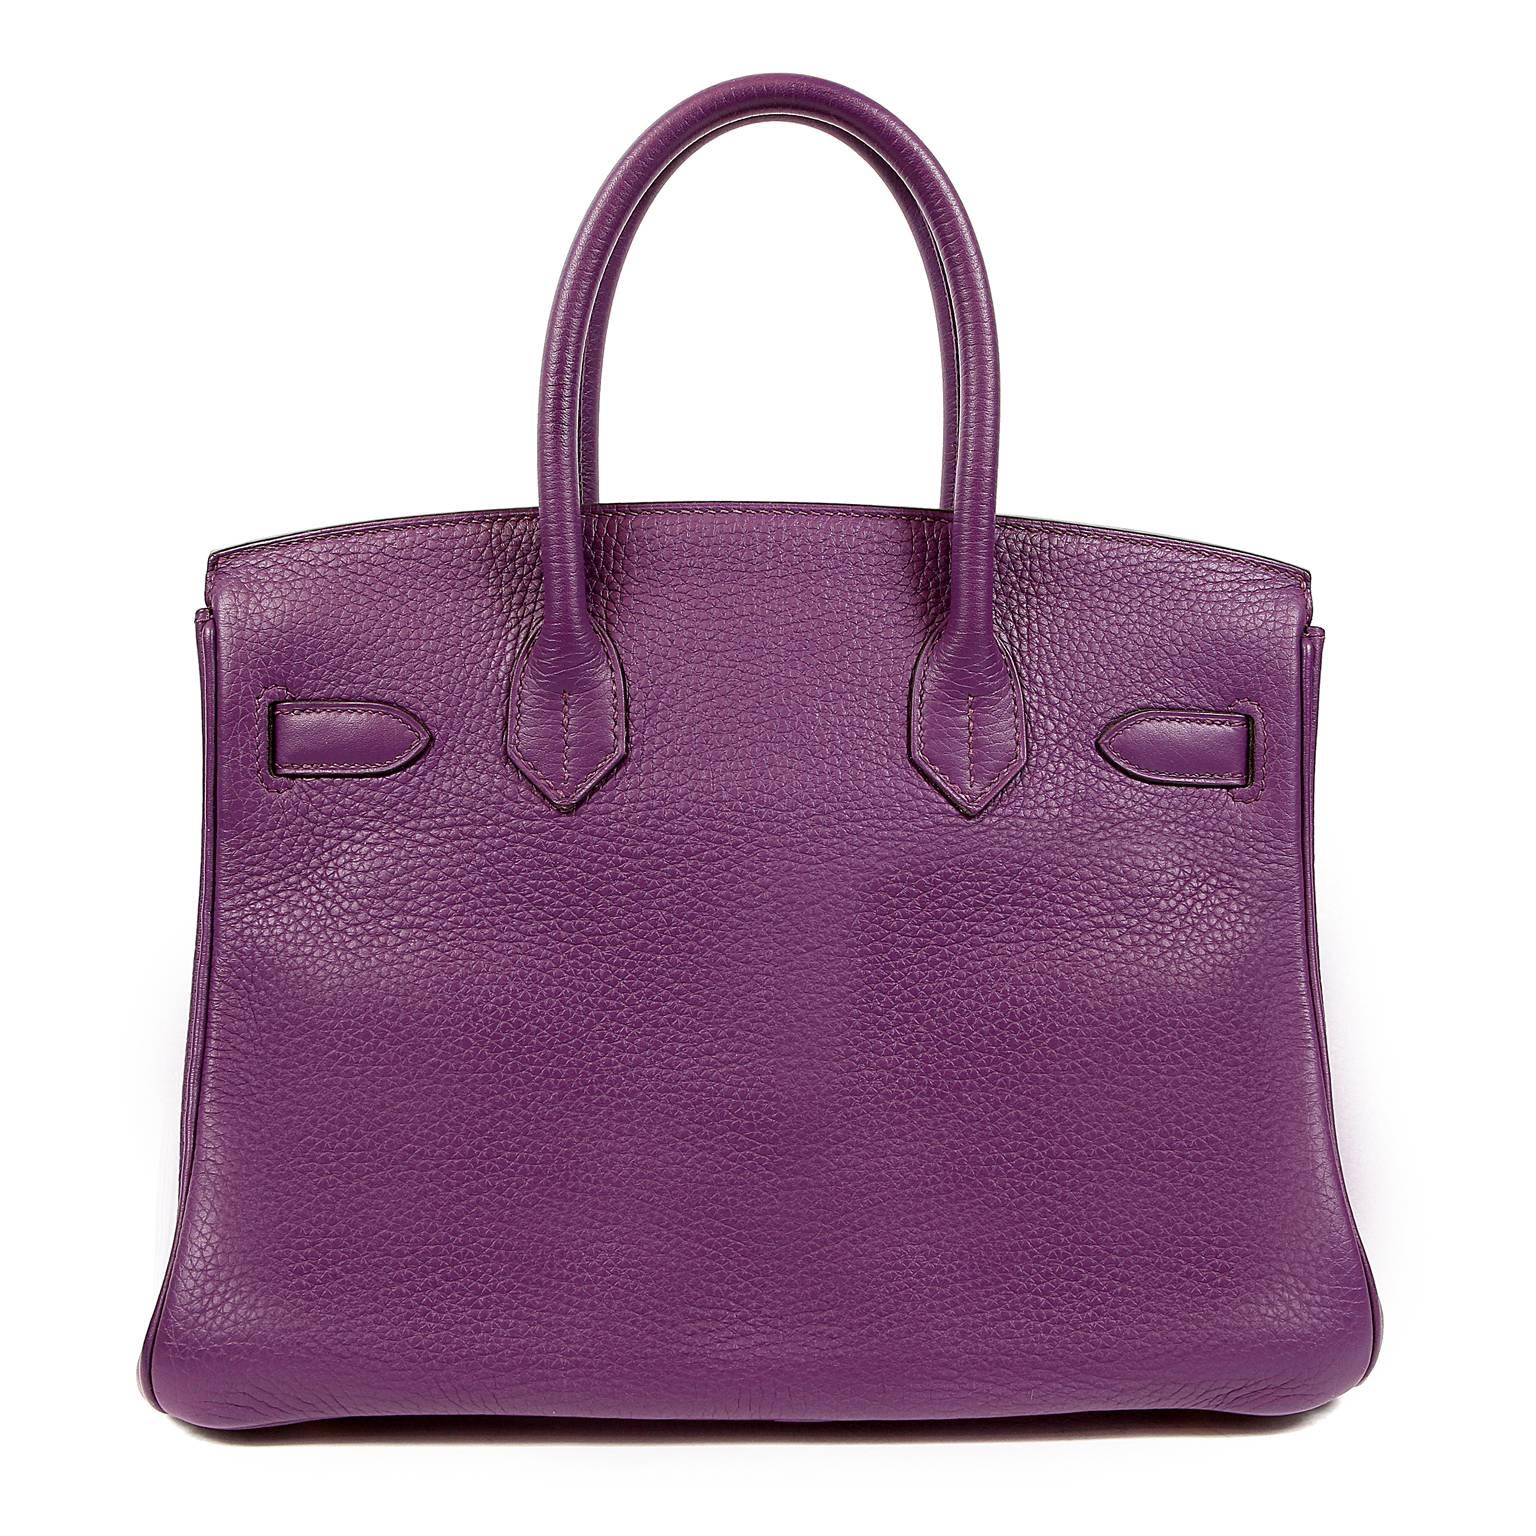 This authentic Hermès Ultra Violet Togo 30 cm Birkin is in pristine condition.    The protective plastic is still intact on most of the hardware. Hand stitched by skilled craftsmen, wait lists of a year or more are not uncommon for the Hermès